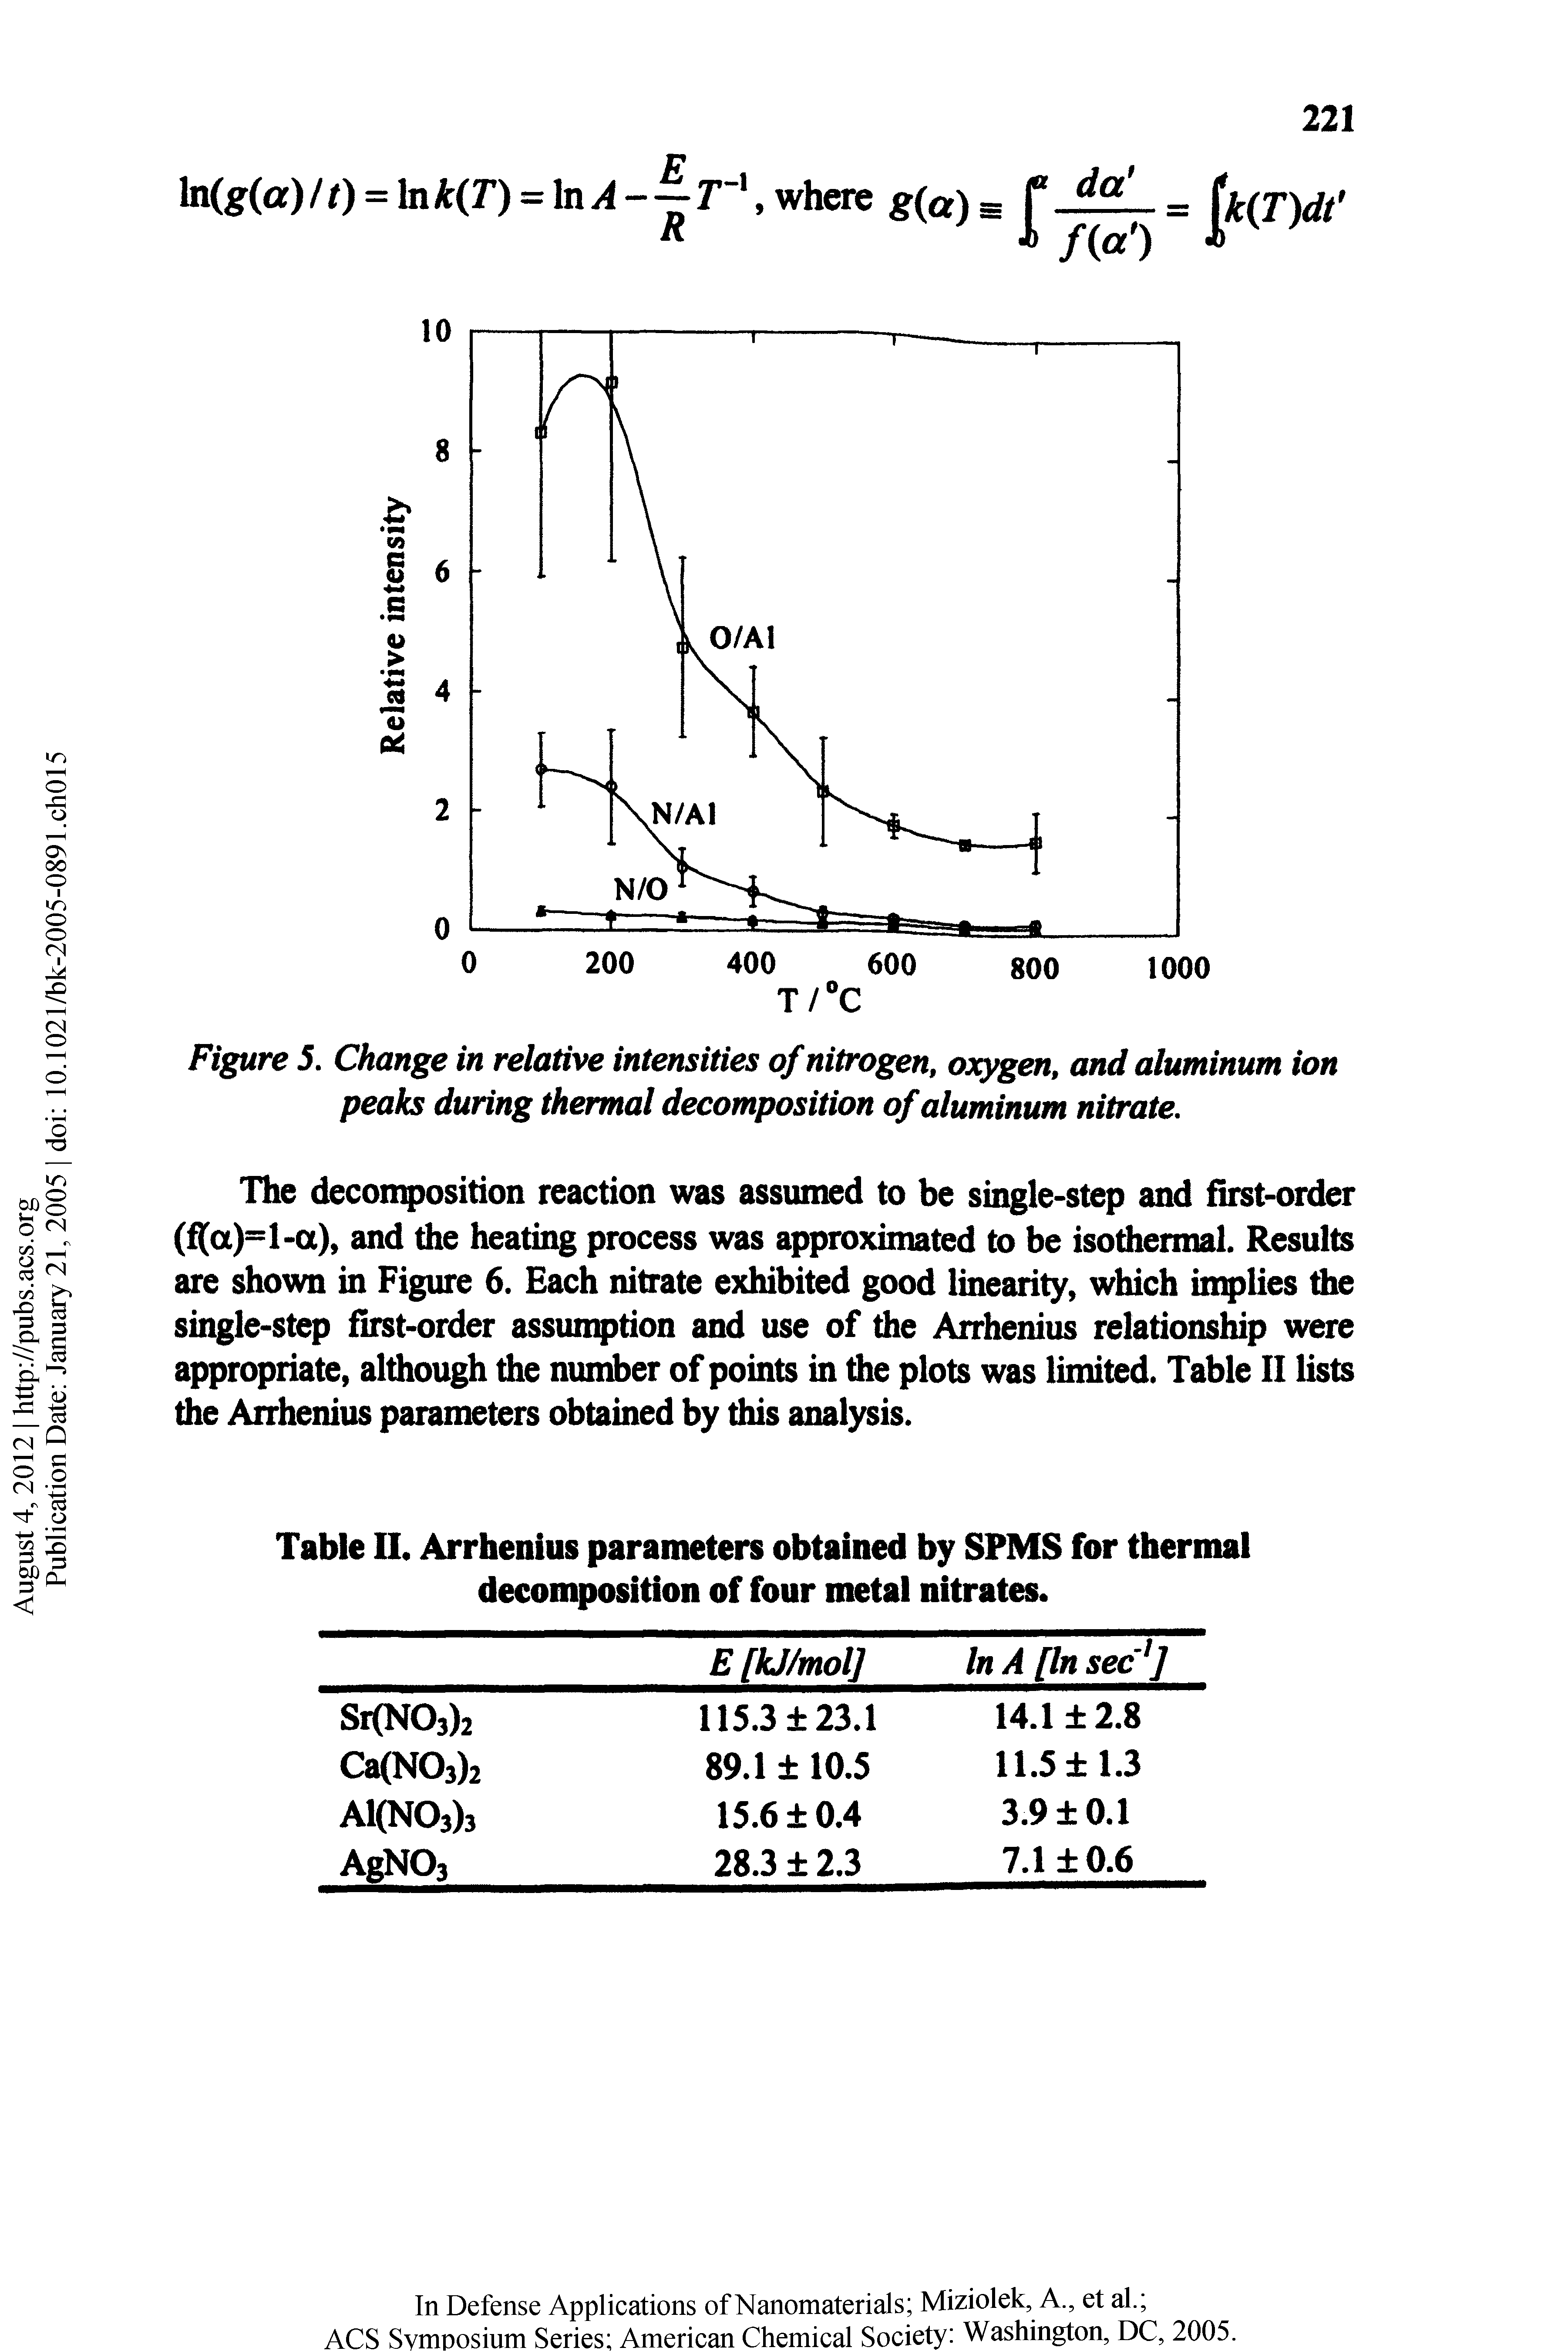 Figure 5. Change in relative intensities of nitrogen, oxygen, and aluminum ion peaks during thermal decomposition of aluminum nitrate.